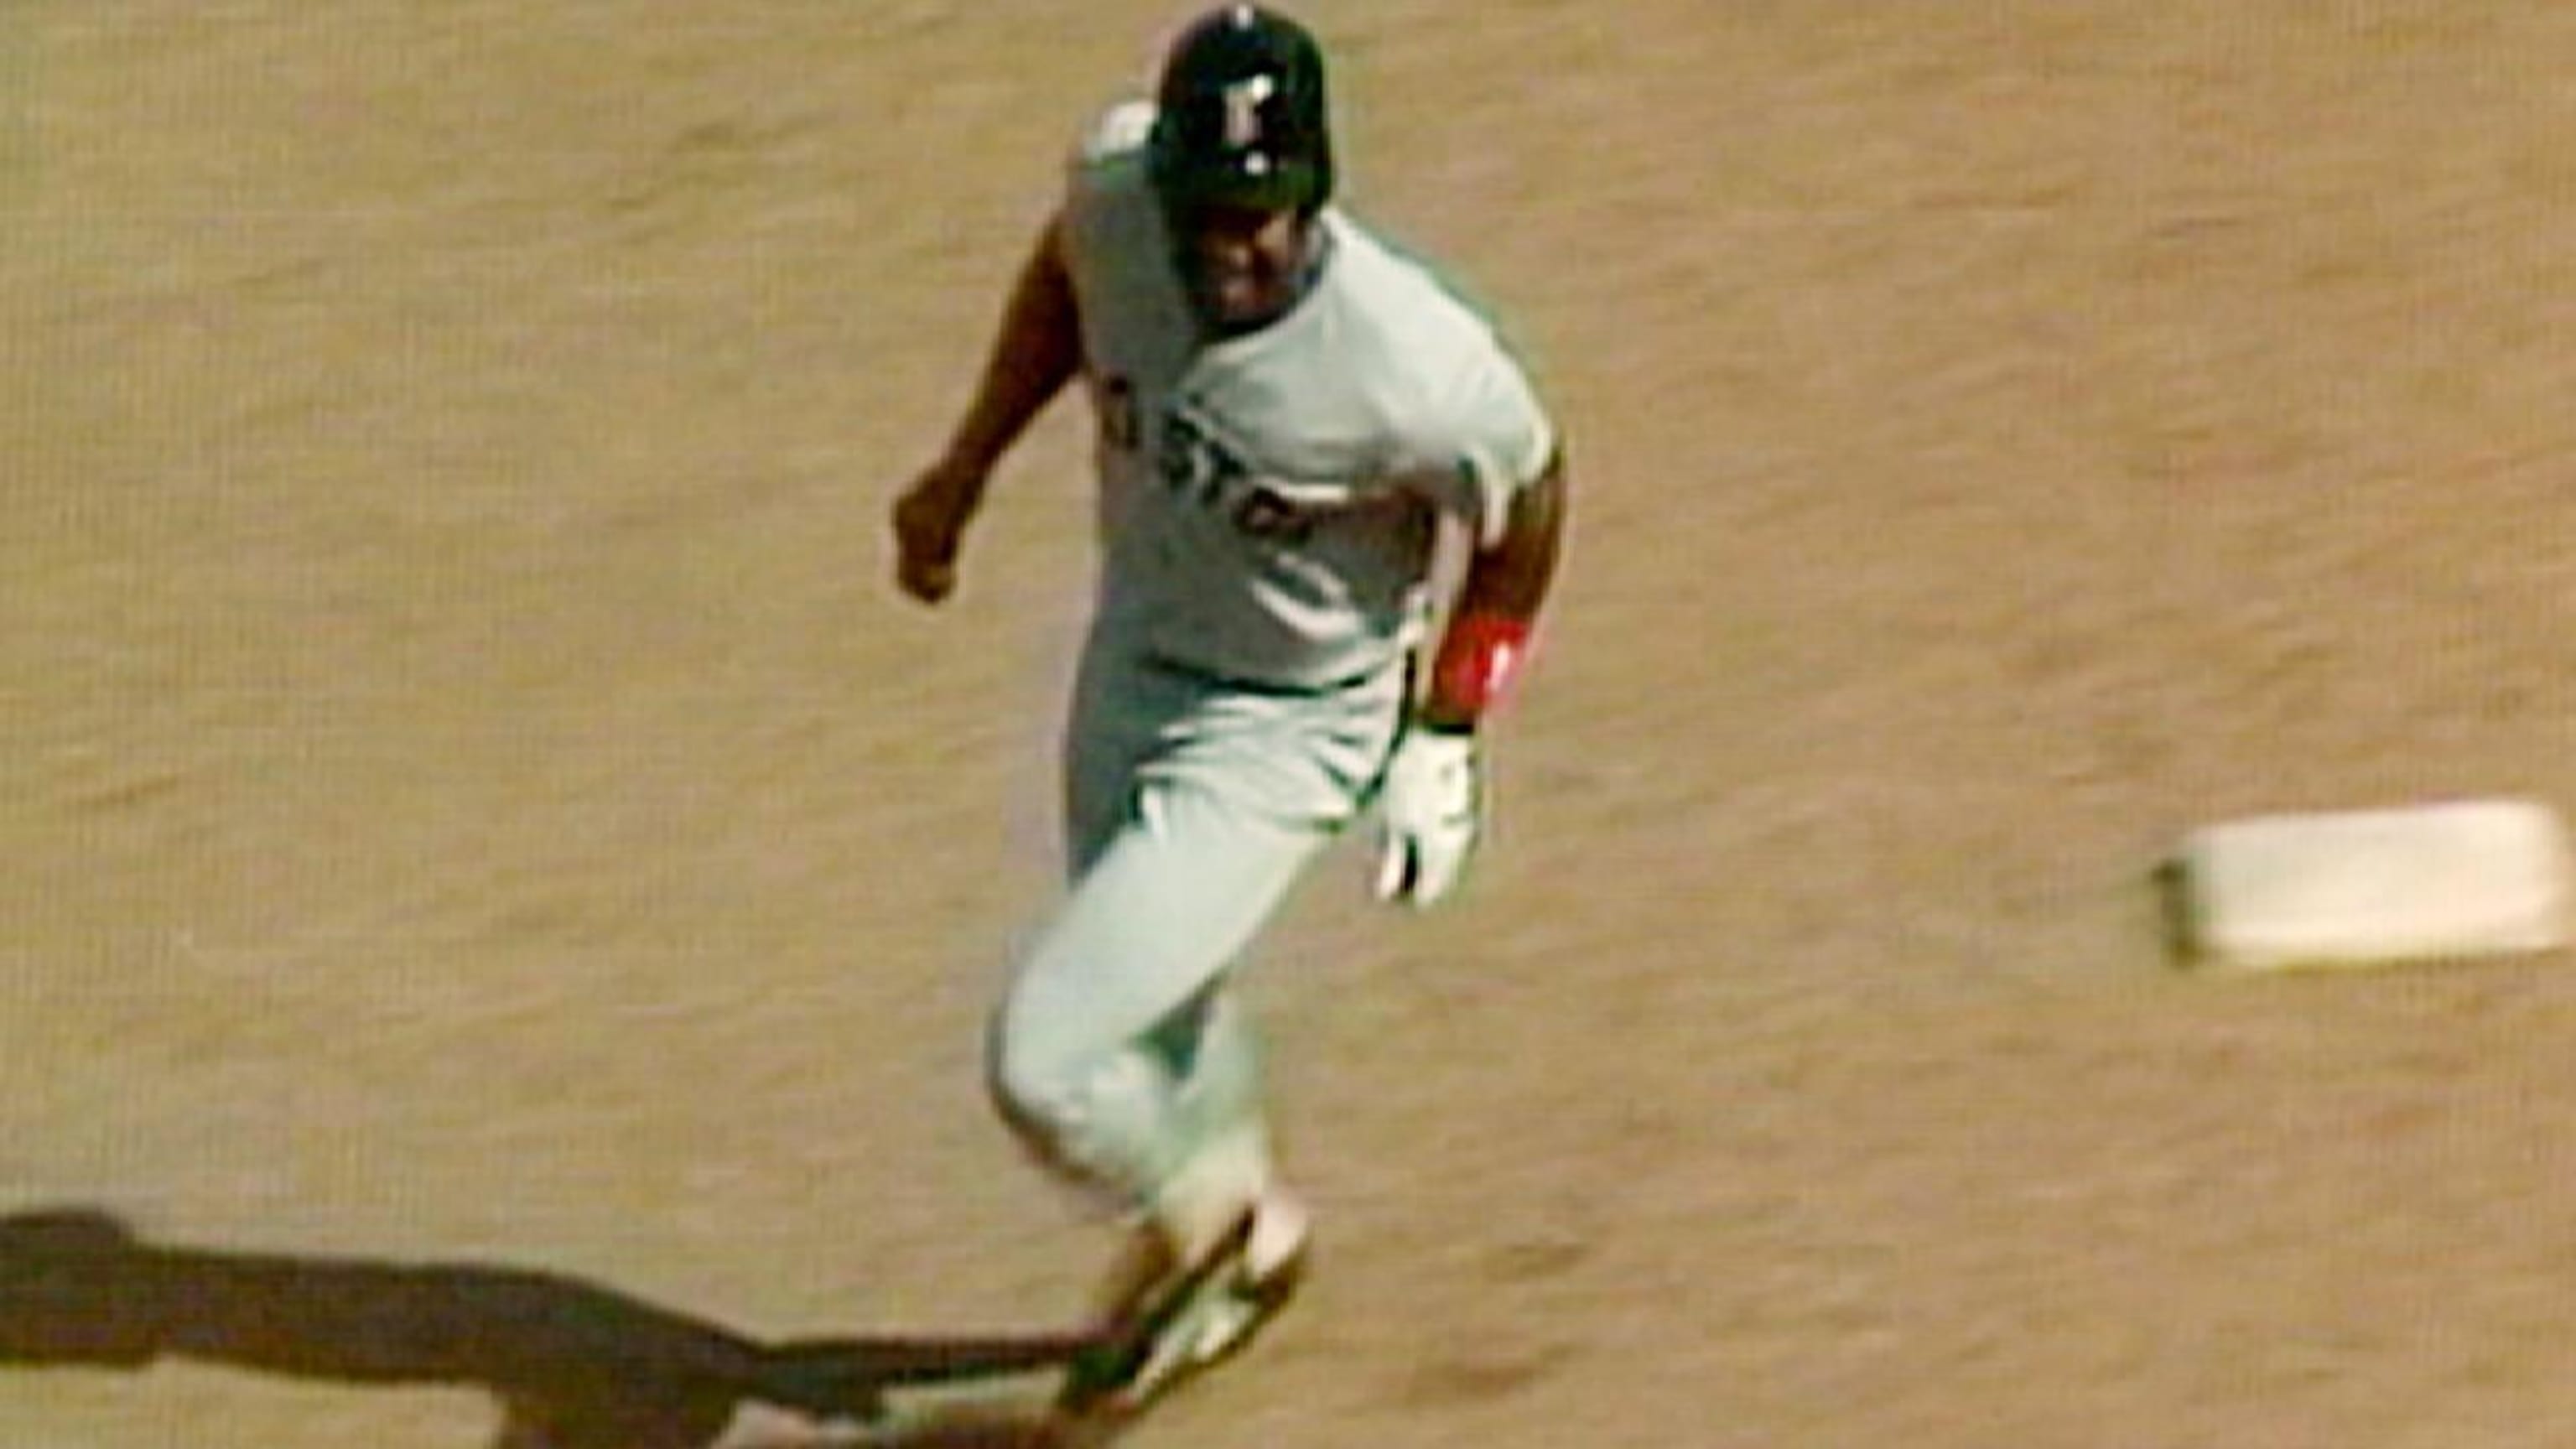 Is Bill Buckner to blame for Red Sox losing 1986 World Series